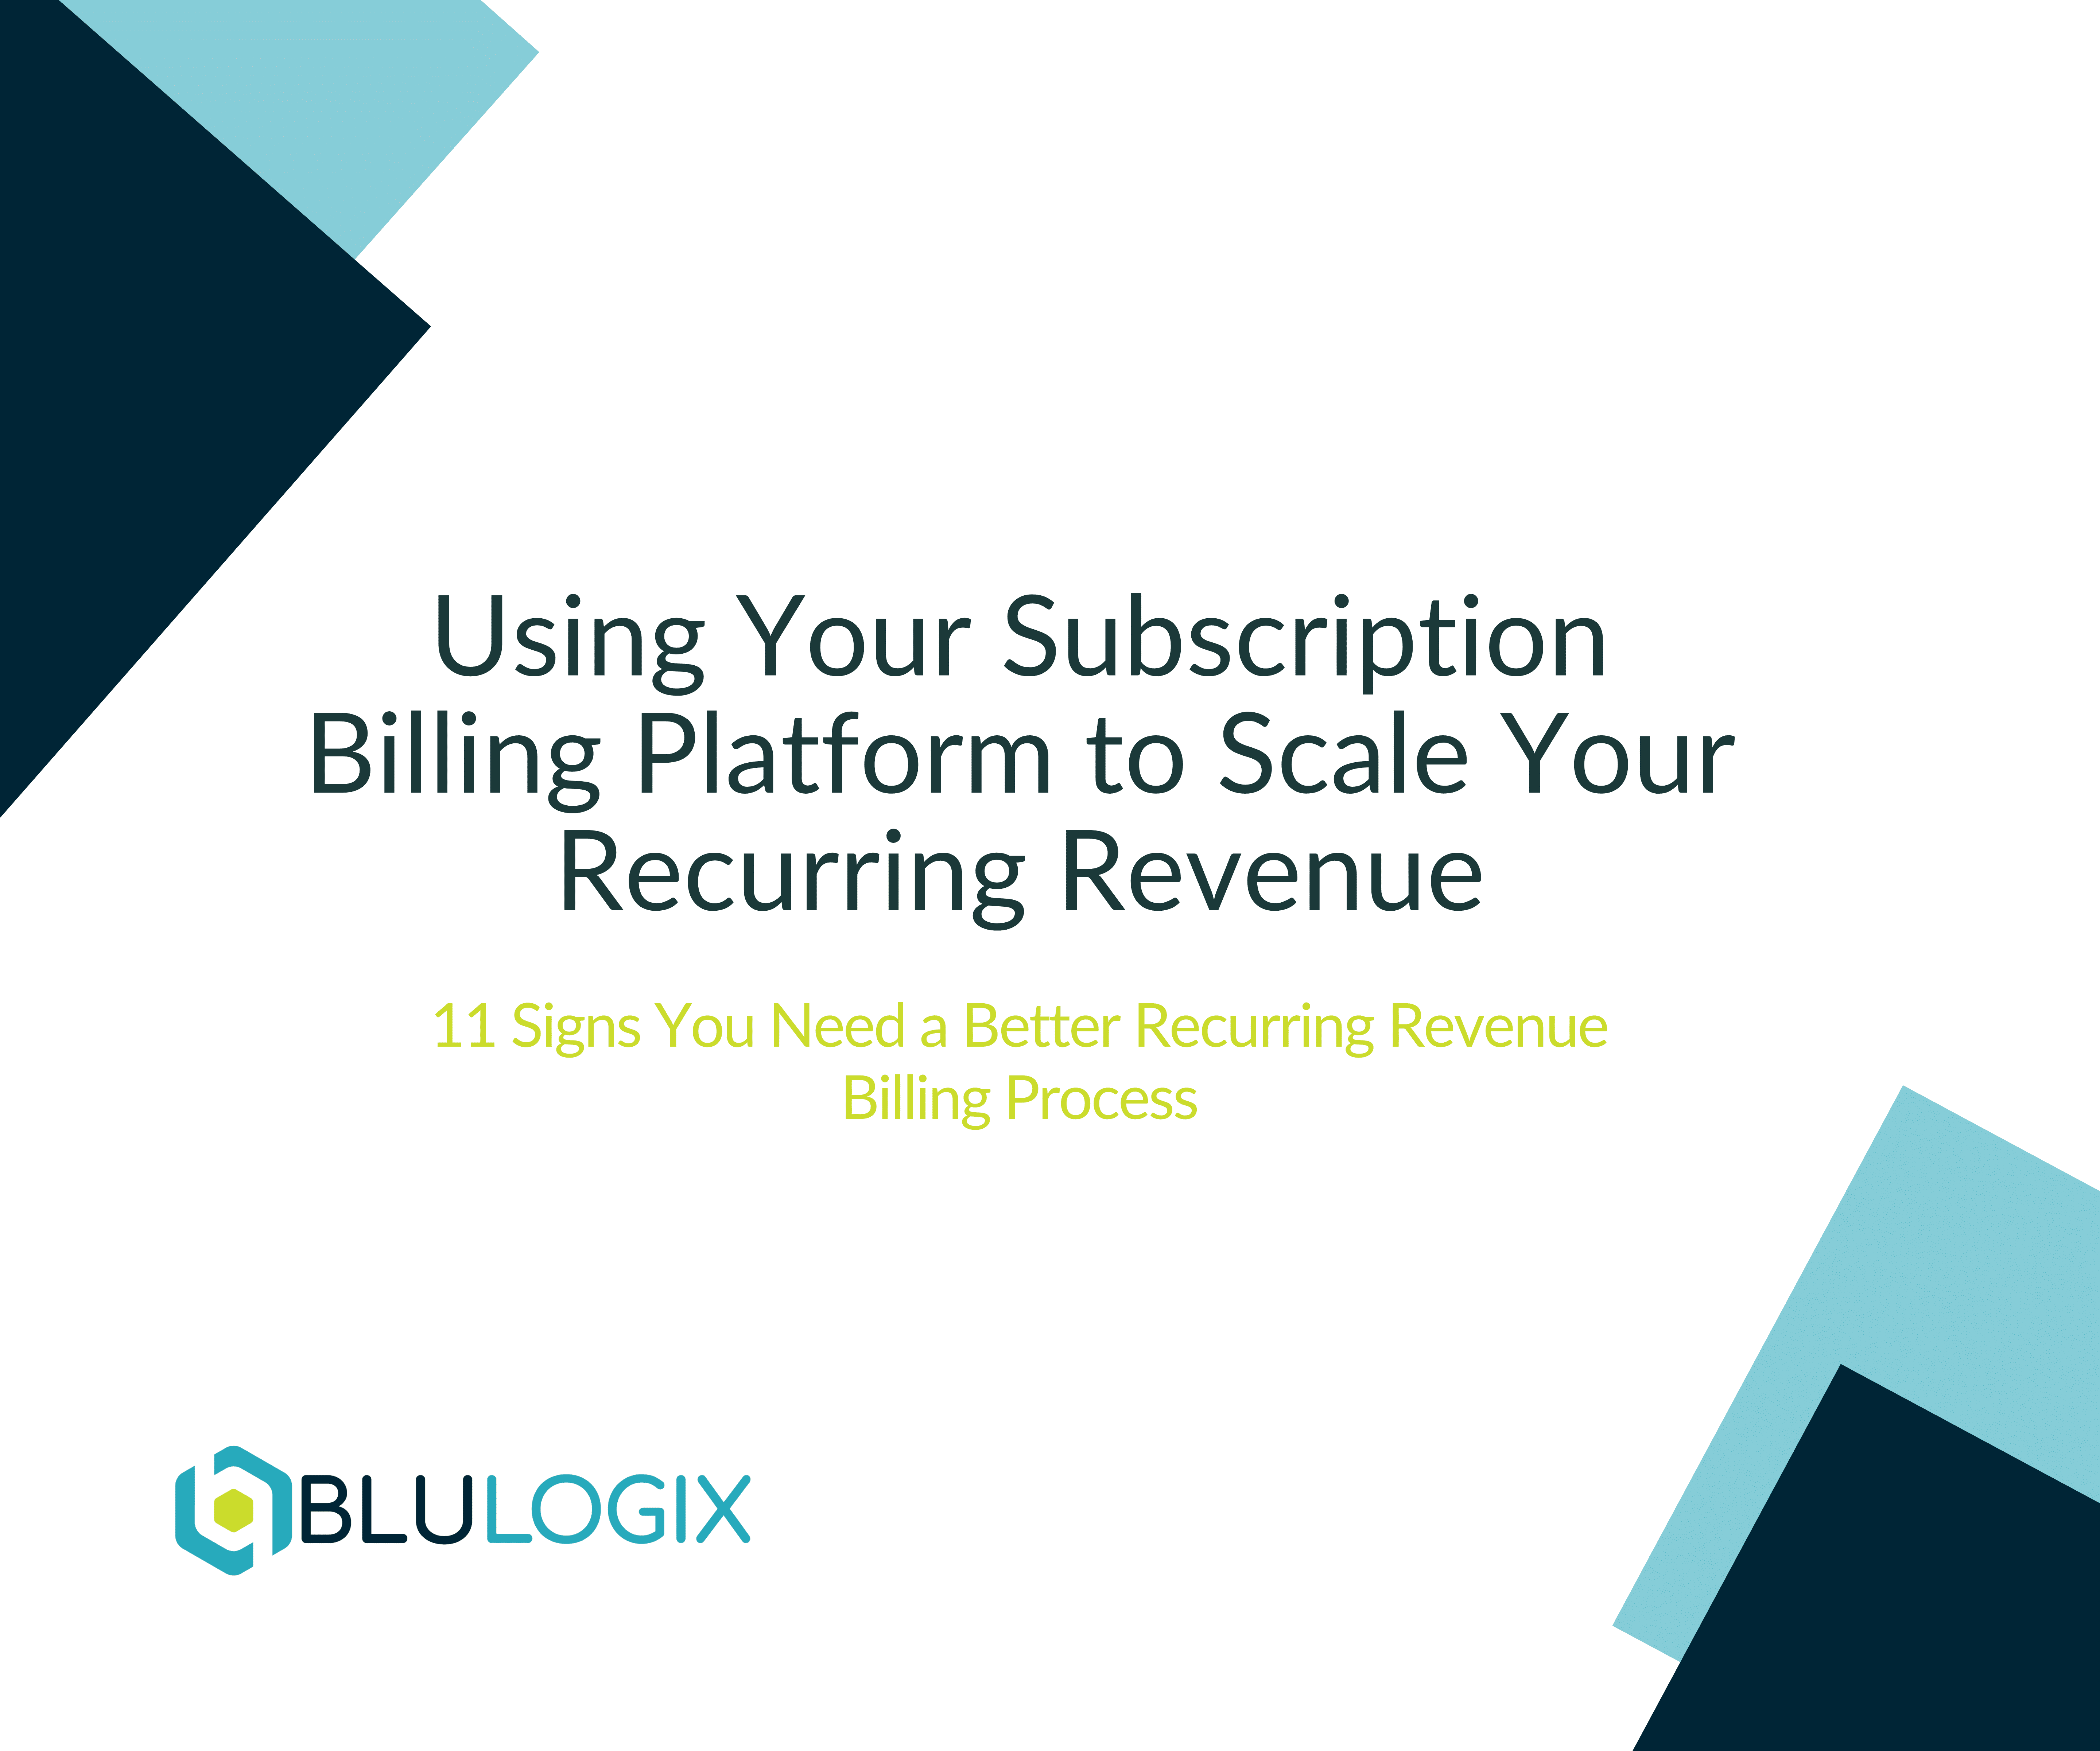 Using Your Subscription Billing Platform to Scale Your Recurring Revenue